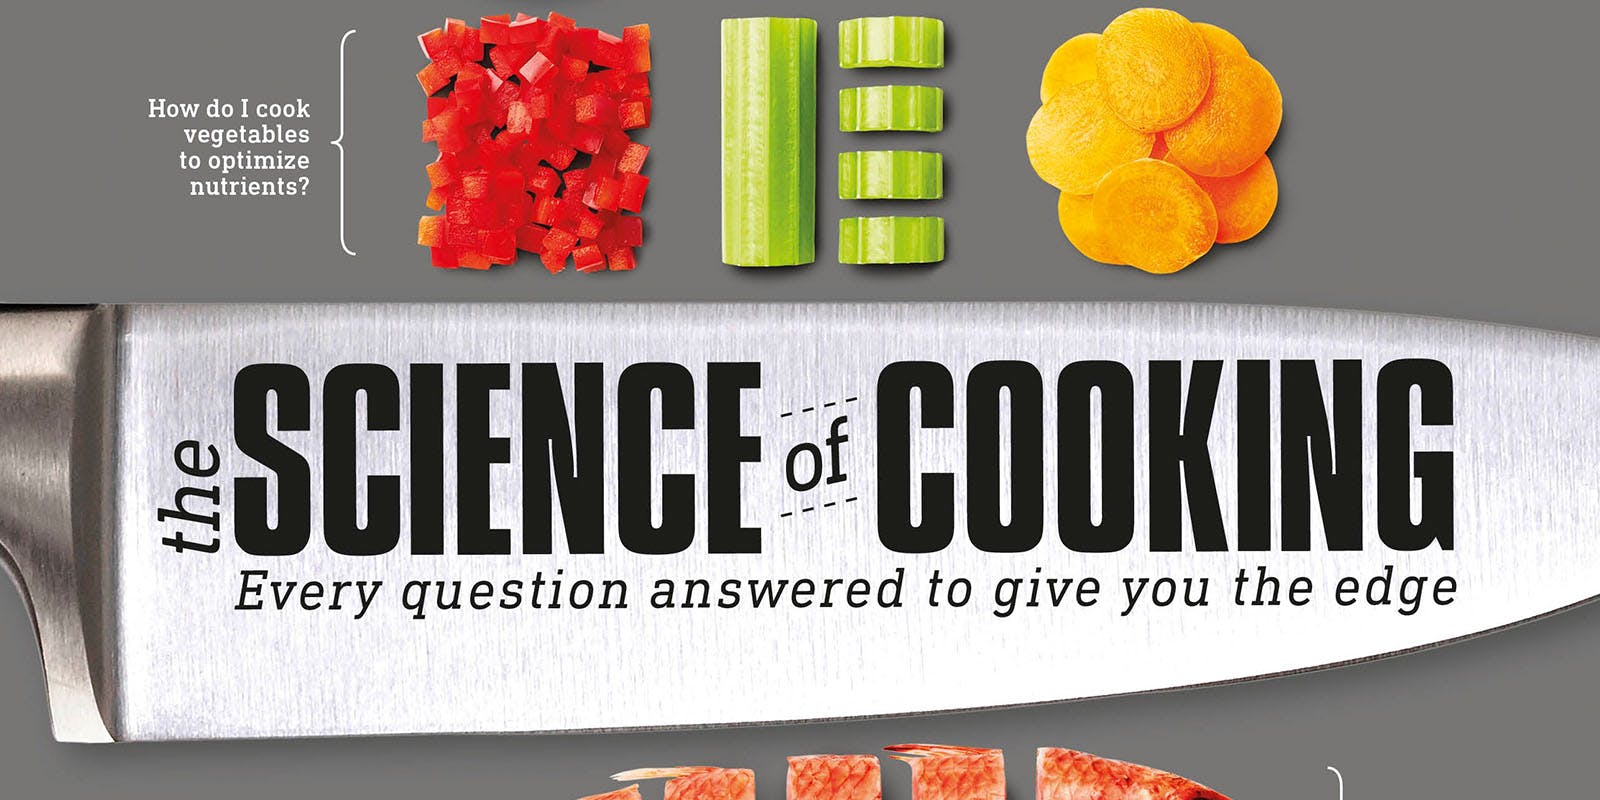 Meals and molecules: how science can transform your cooking